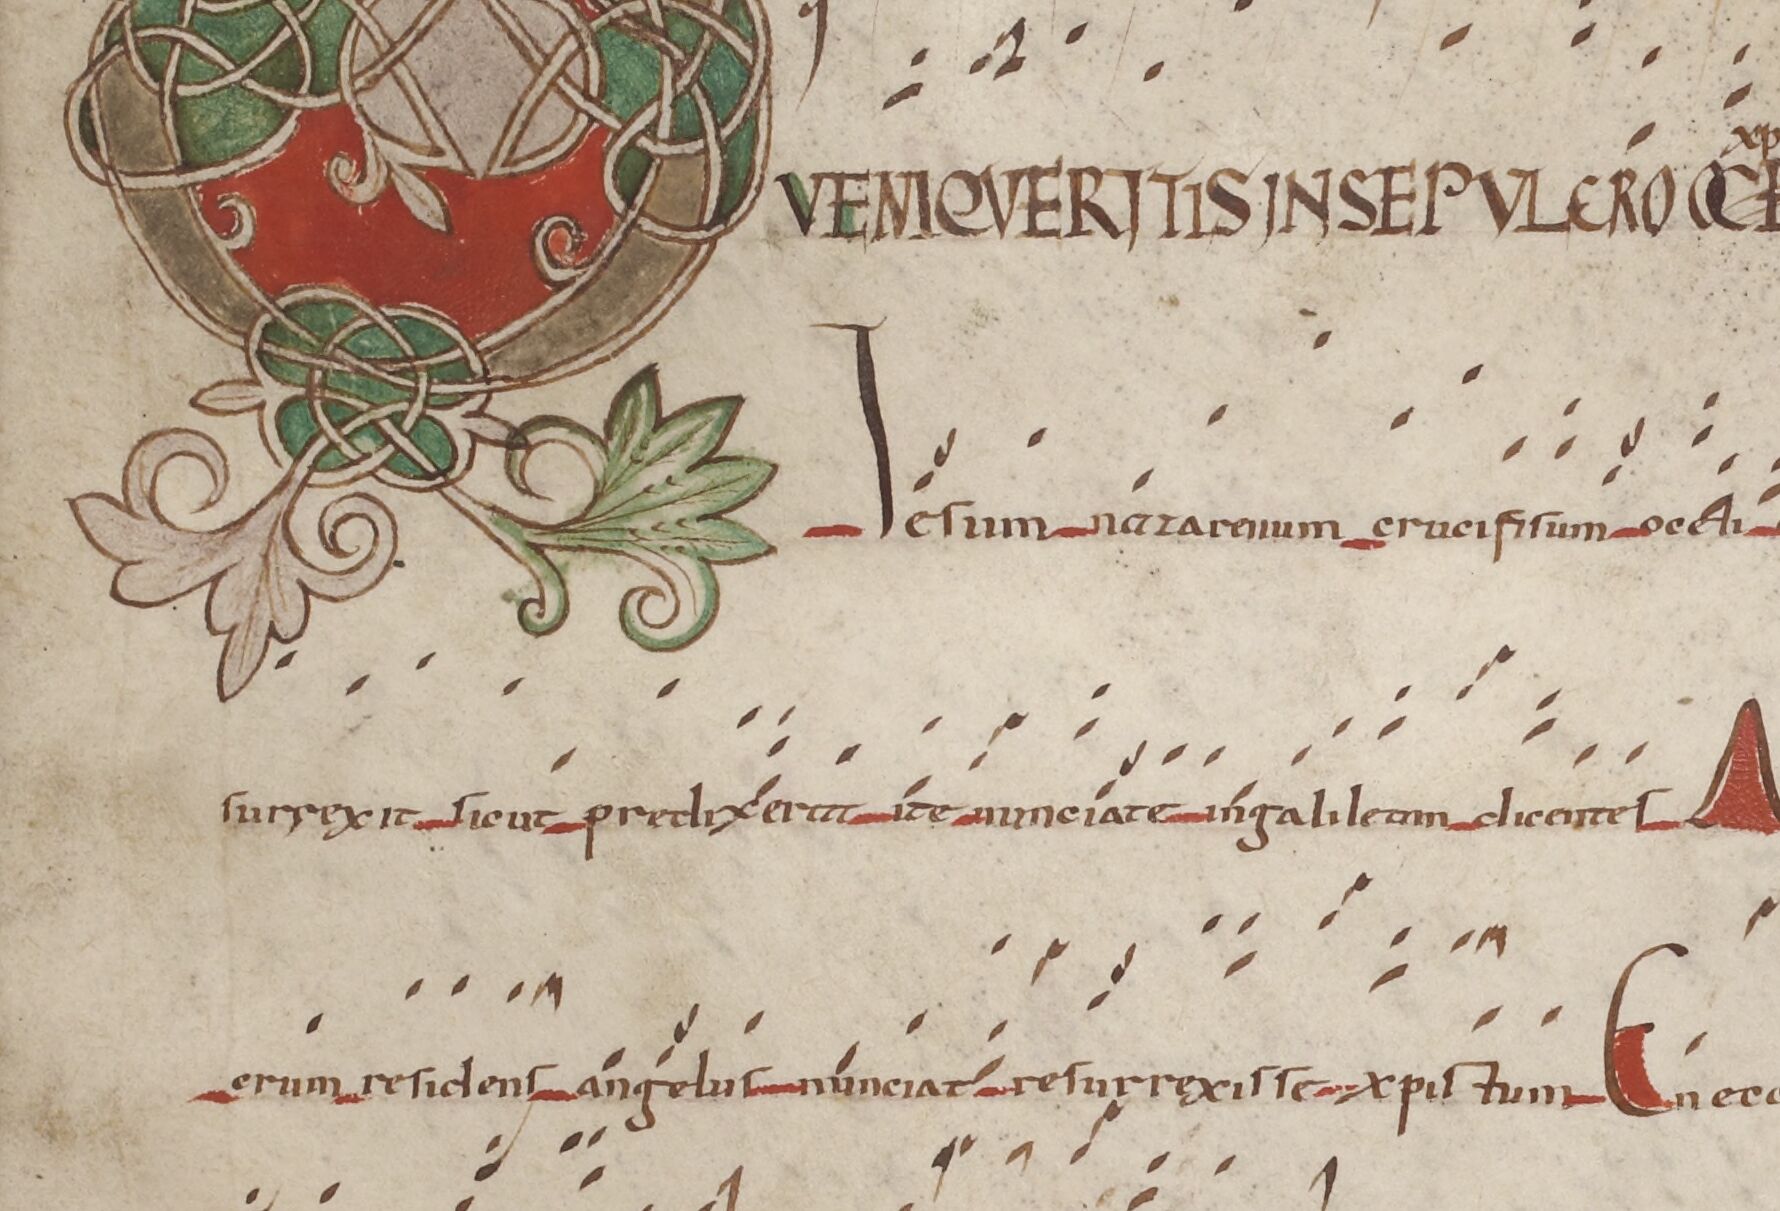 Constellations of Neumes